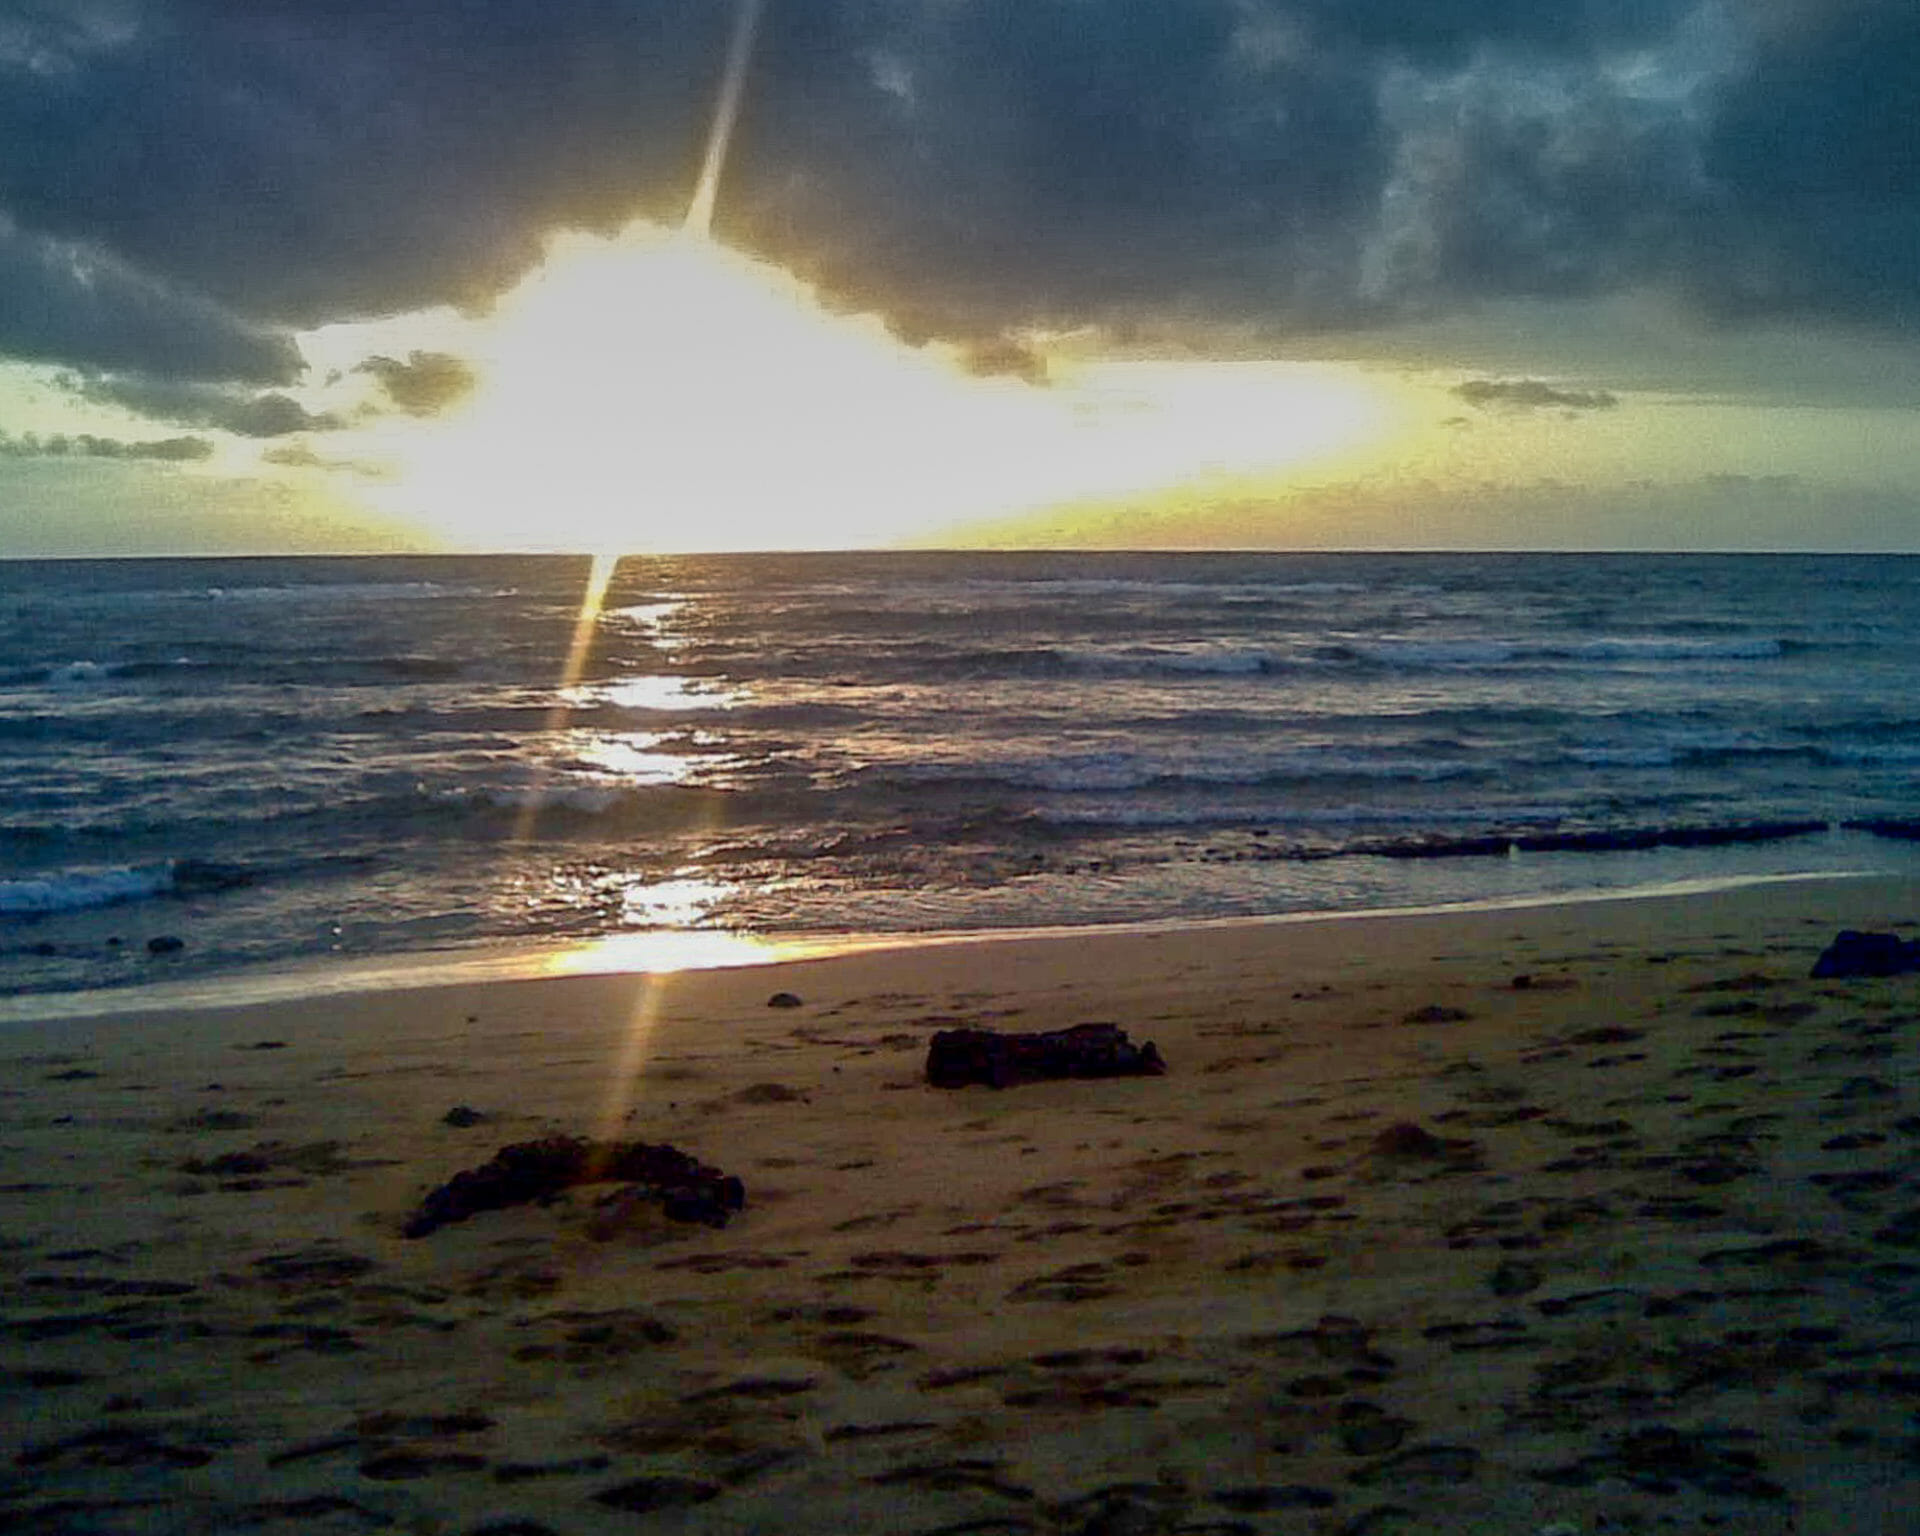 One of our first sunrises on Kauai from 2011.